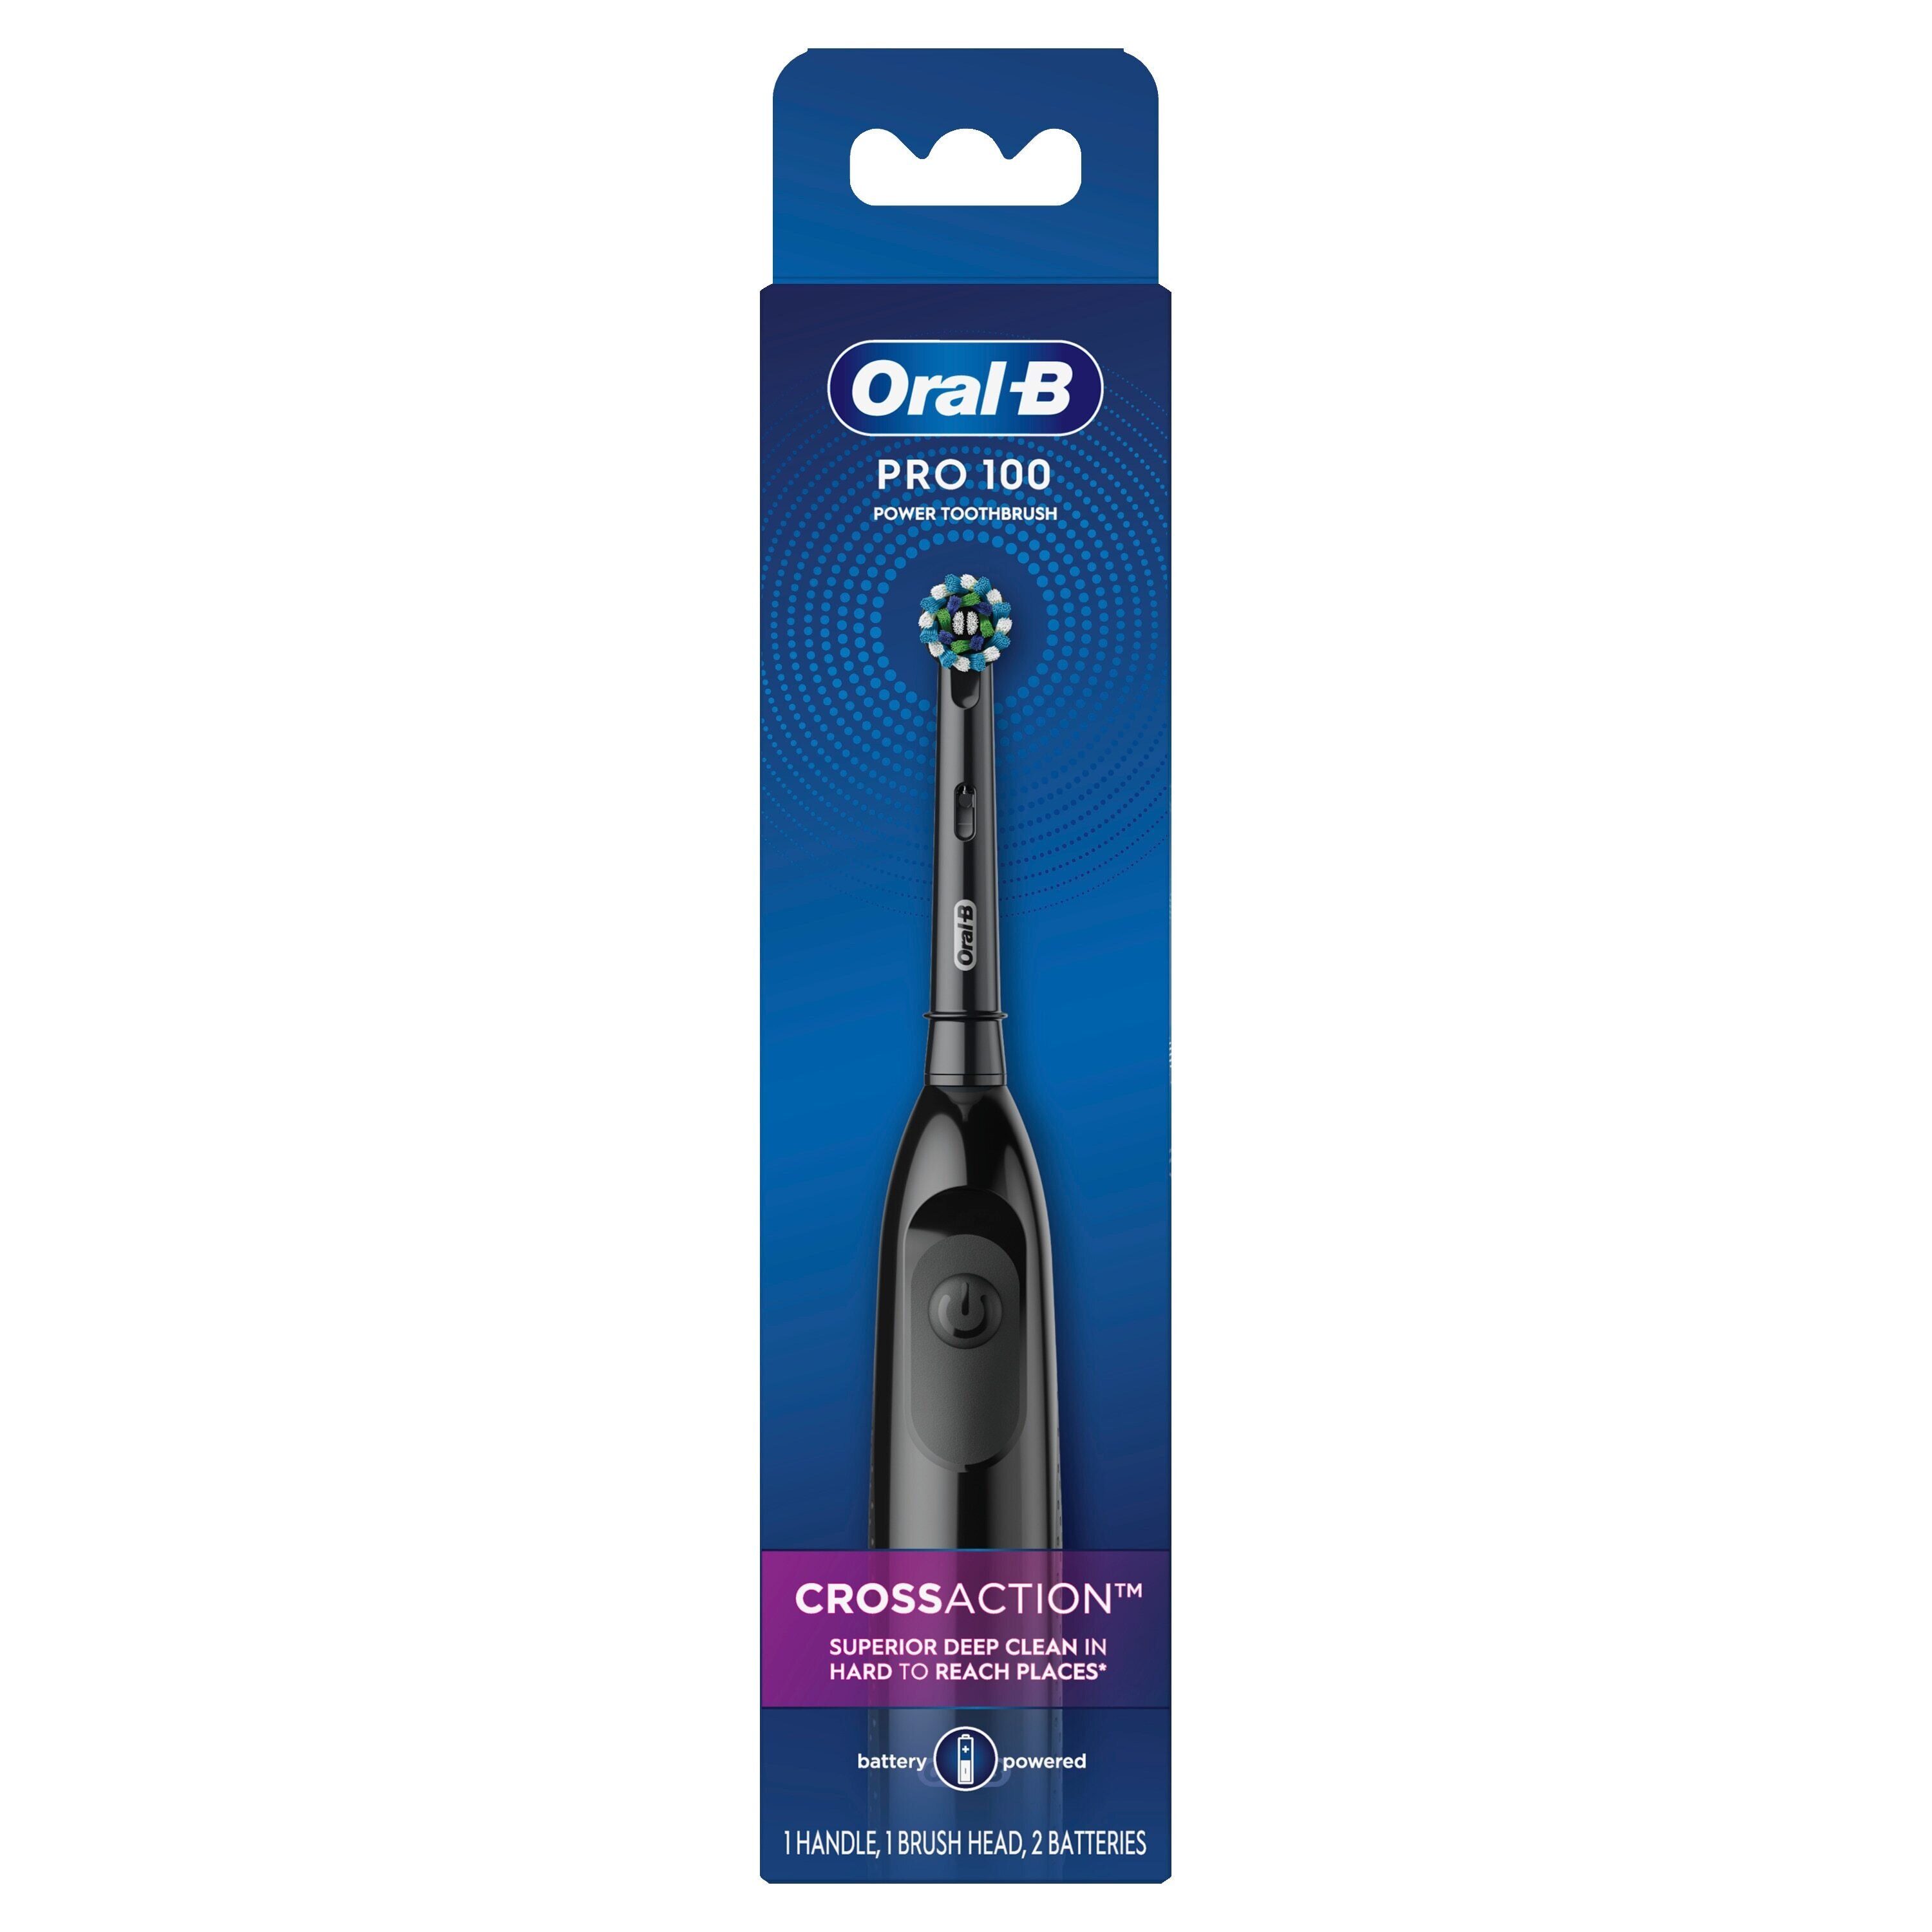 Oral-B Pro-Health Clinical, Superior Clean, Battery Powered Toothbrush, Black